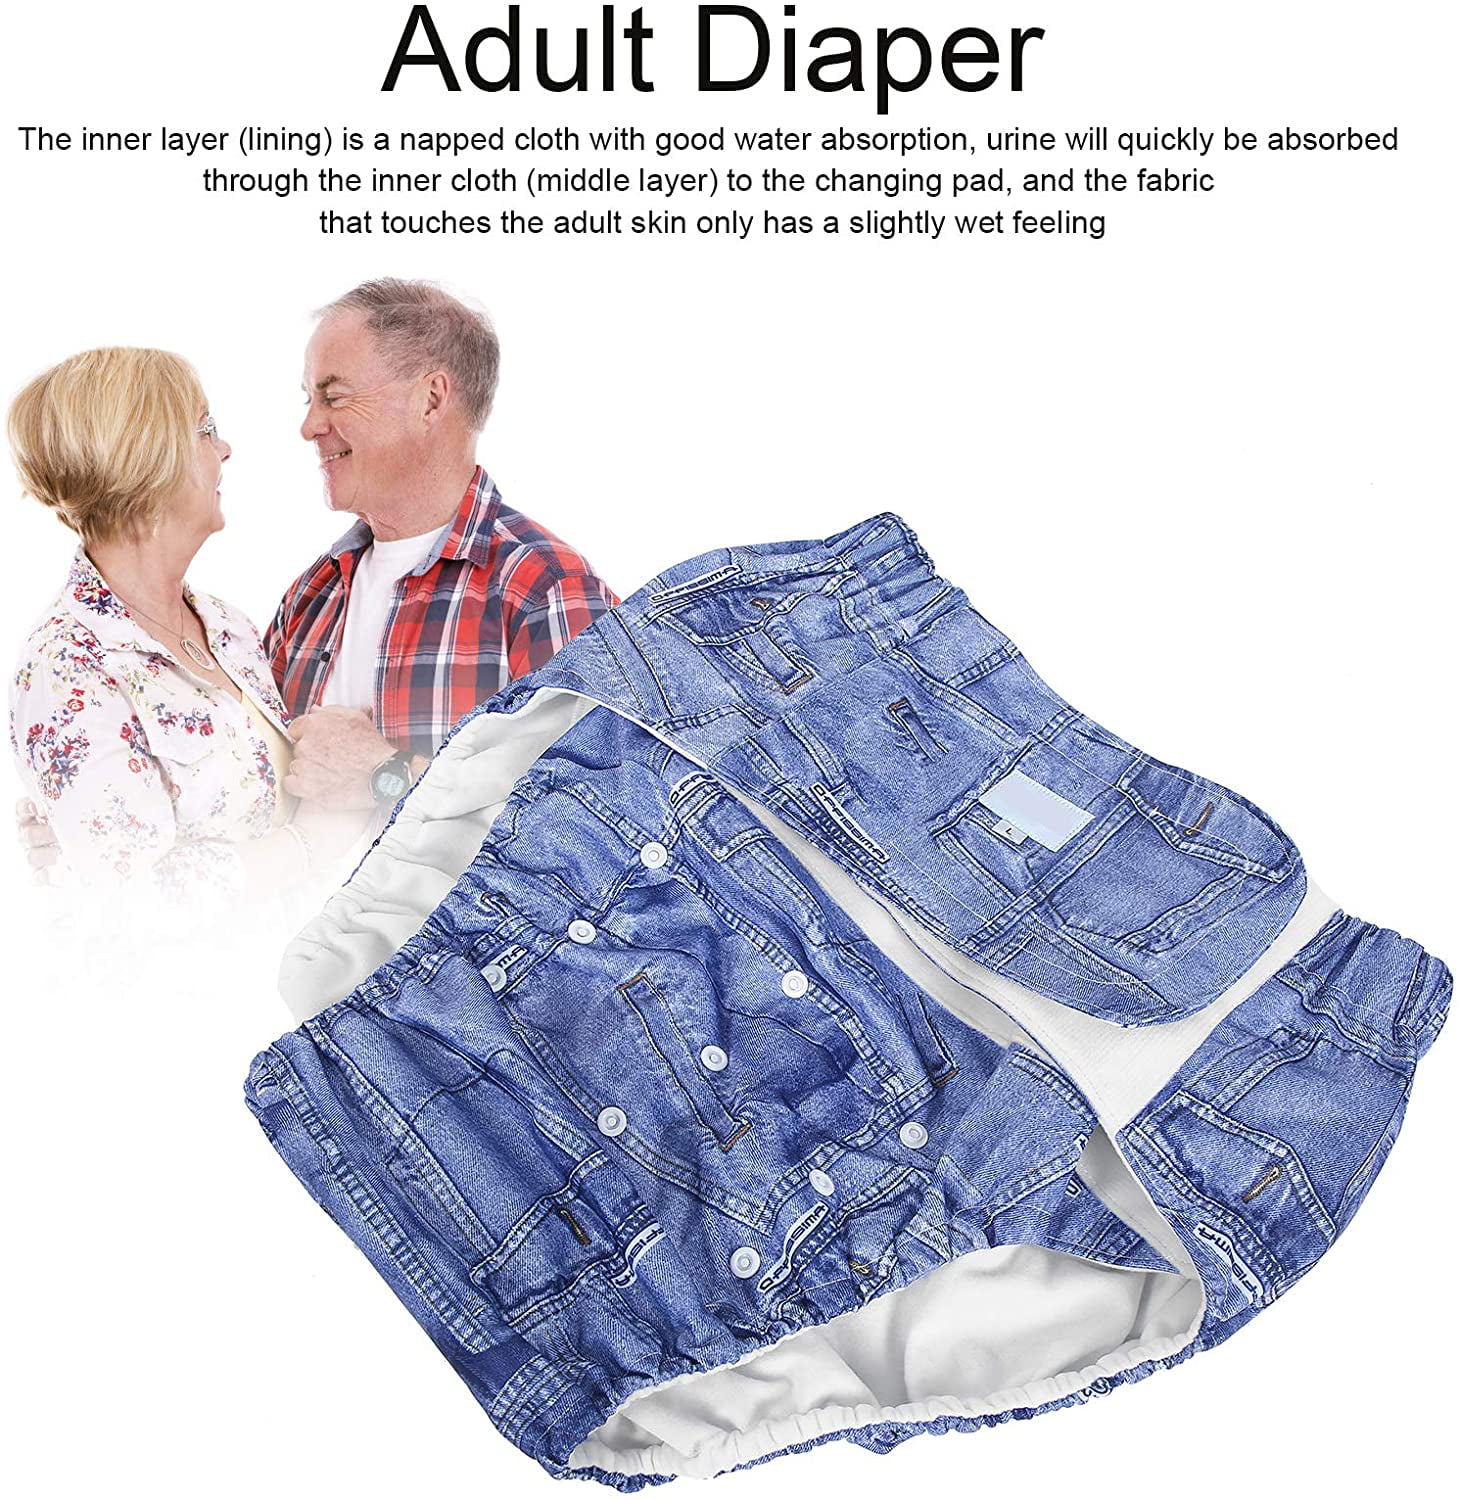 Adult By Diapered Man Woman